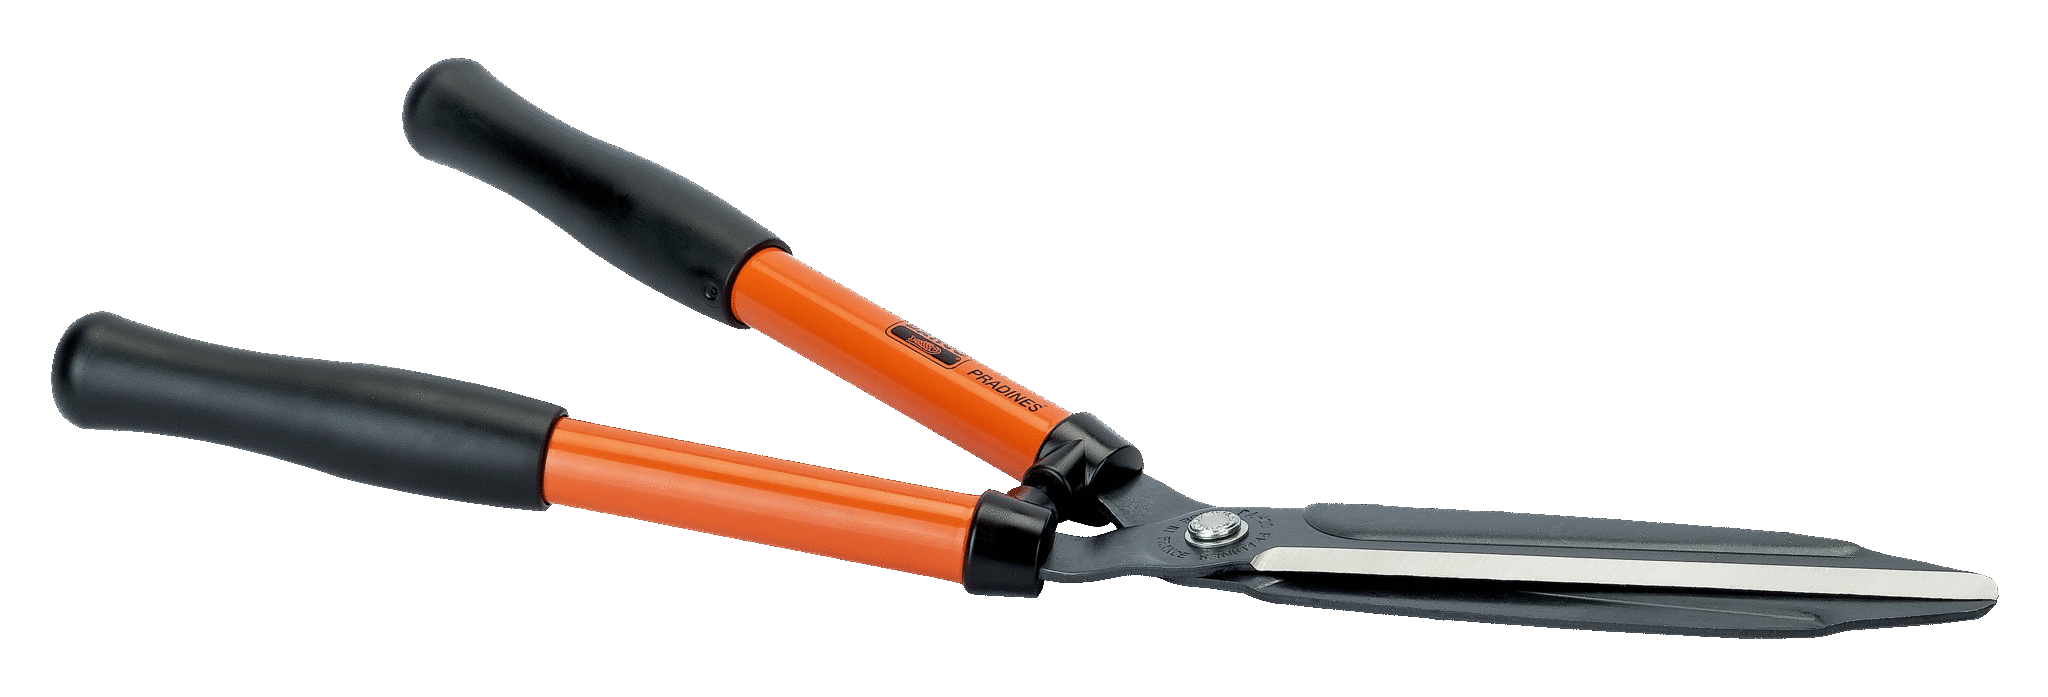 Universal Hedge Shears with Steel Handle, 580mm - P59-25-F by Bahco